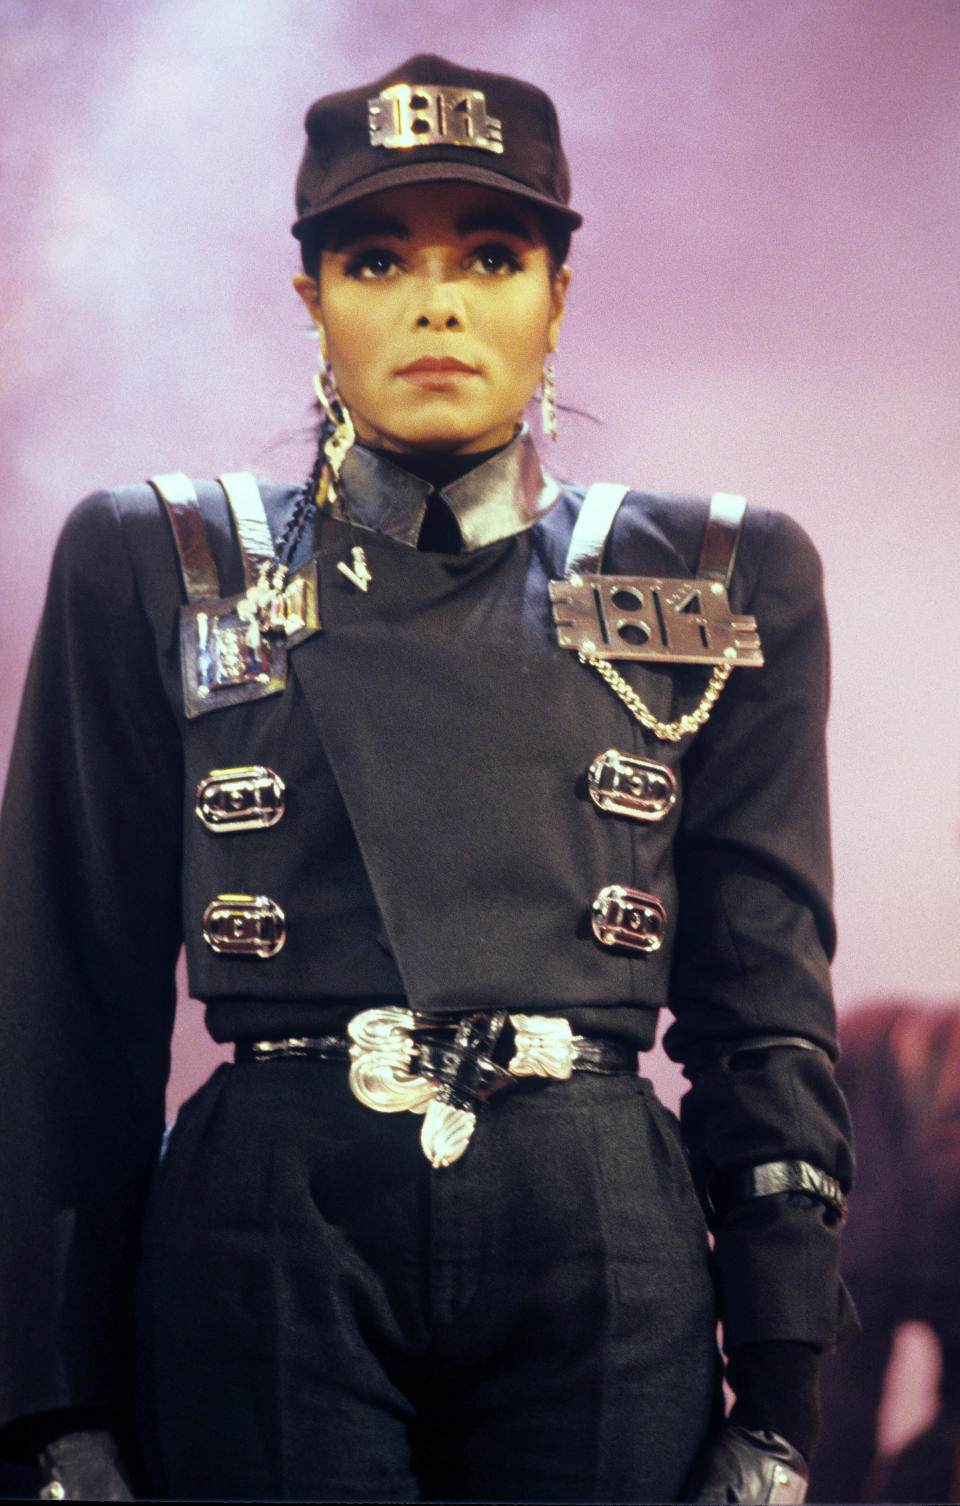 Janet Jackson in November 1989 - Credit: Fryderyk Gabowicz/picture-alliance/dpa/AP Images